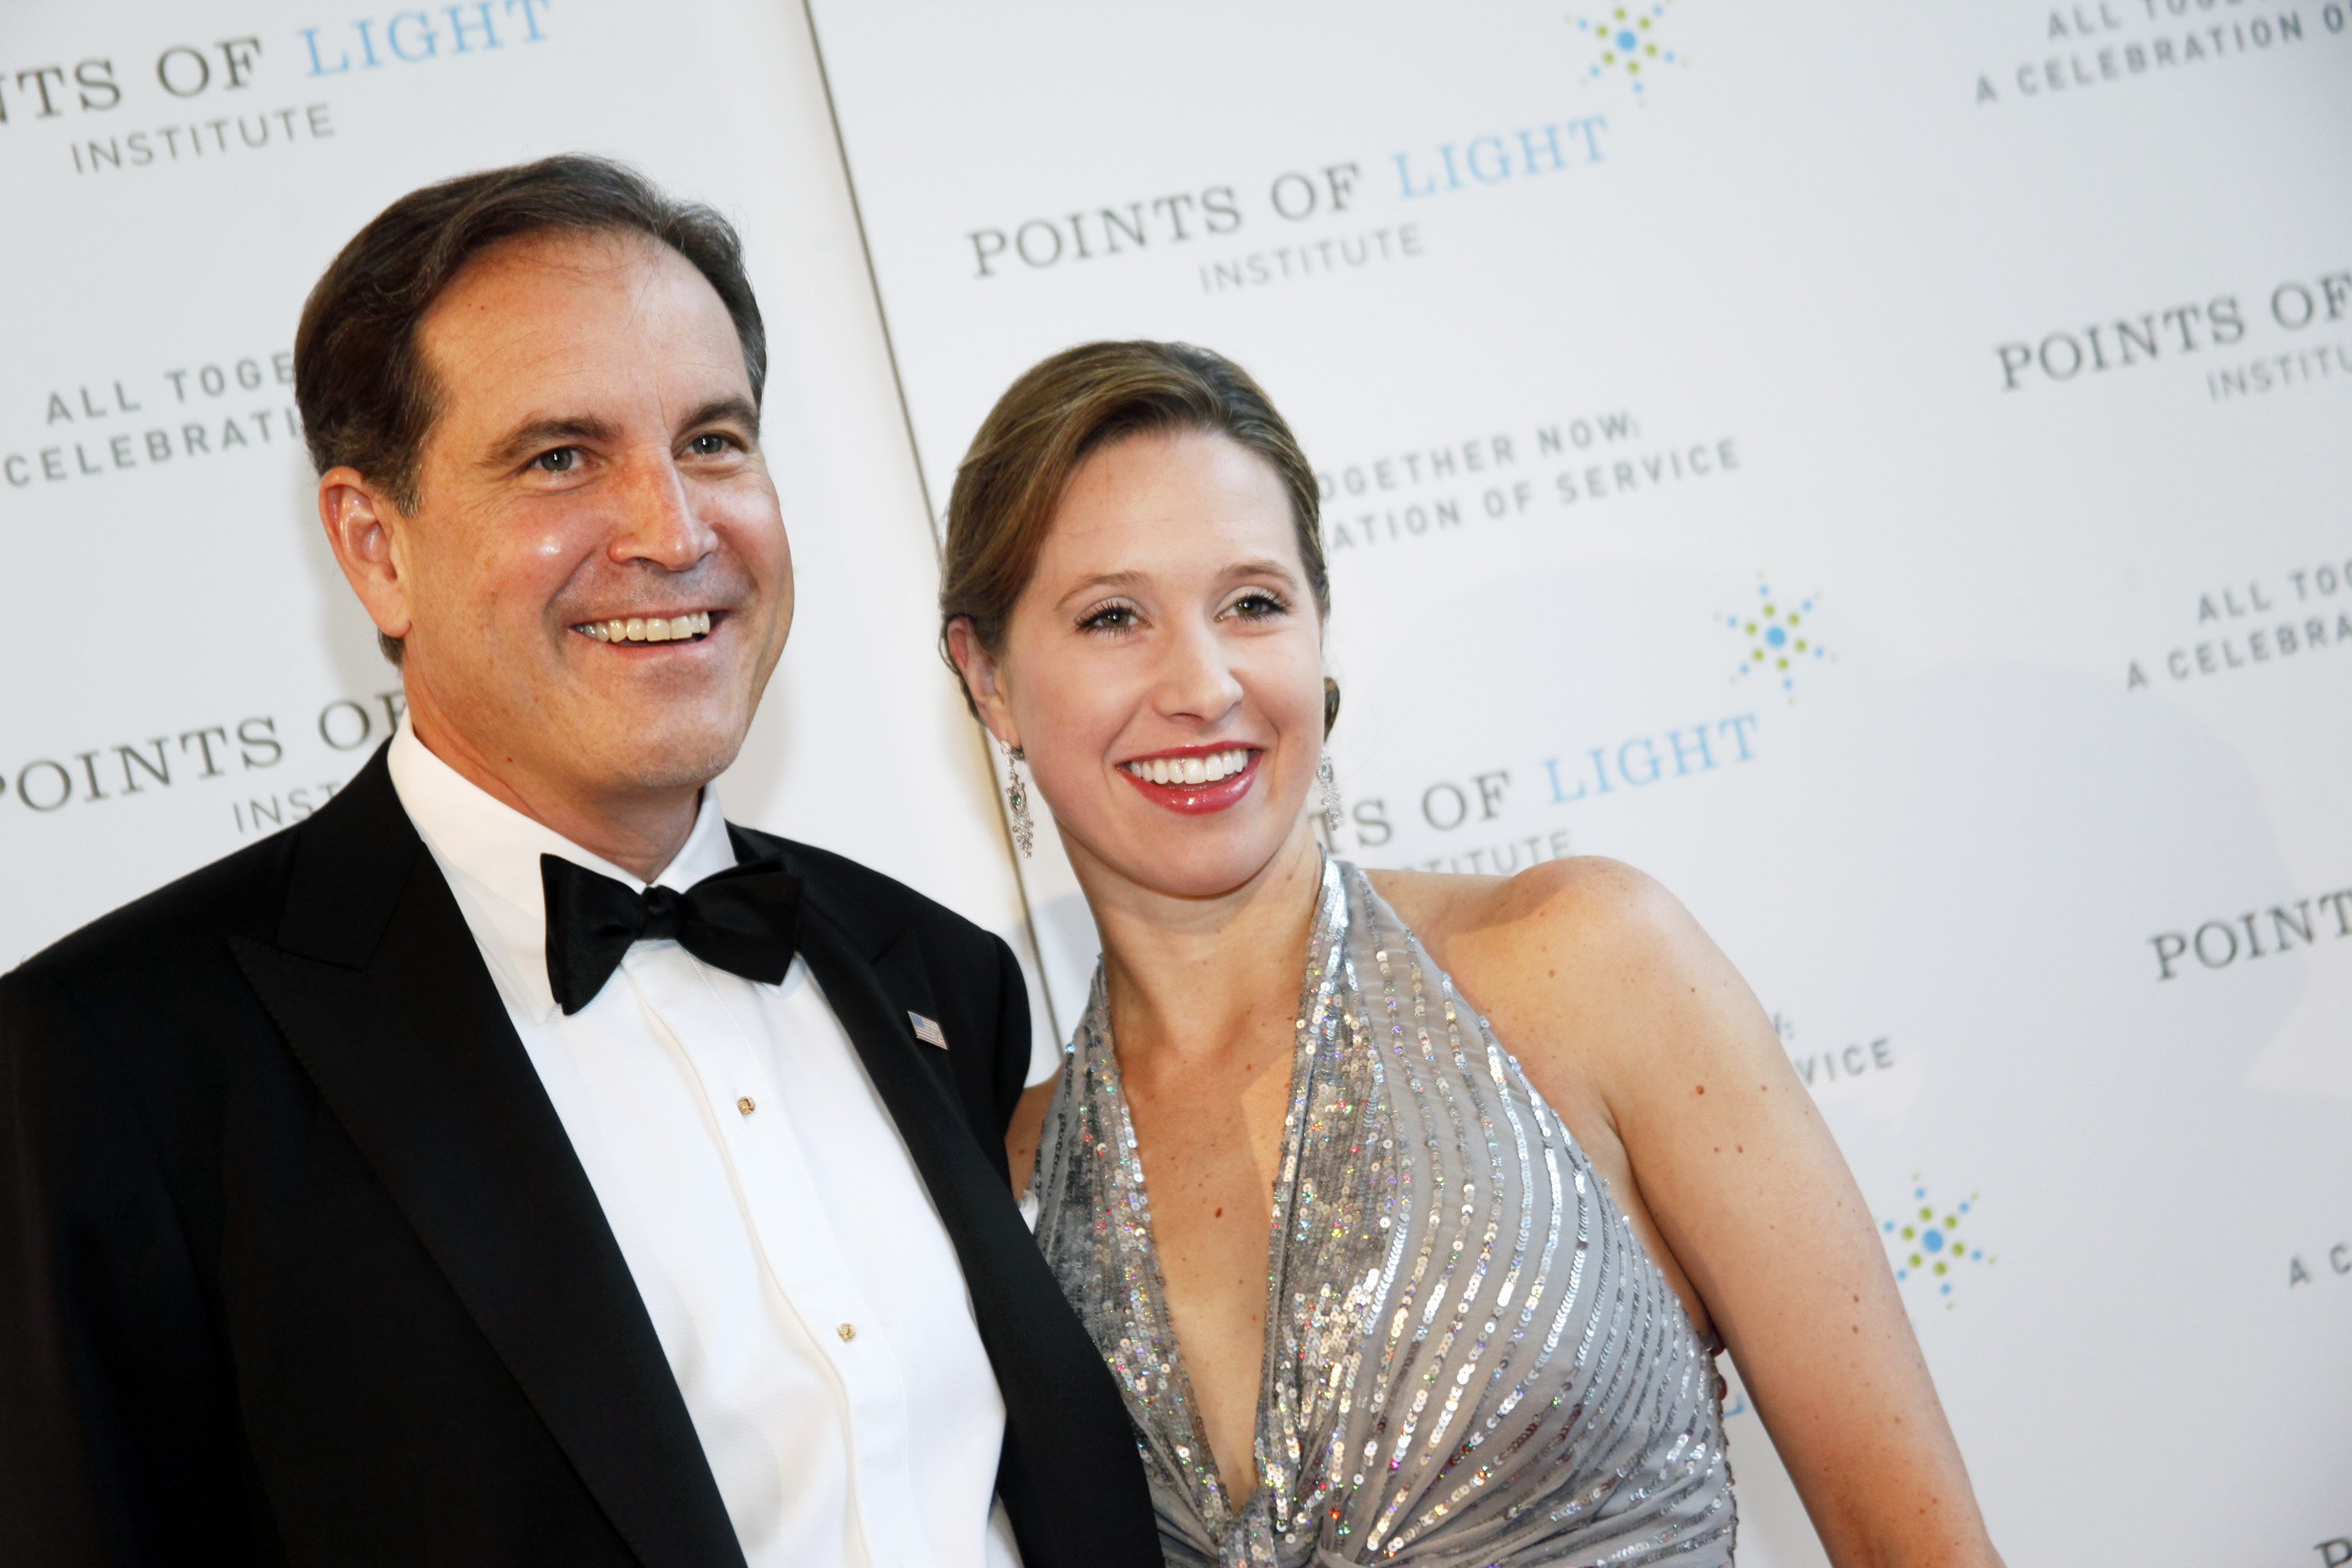 Courtney Richards and Jim Nantz during the Points of Light Institute "All Together Now-A Celebration of Service" to honor George H.W. Bush, March 21, 2011. | Source: Getty Images